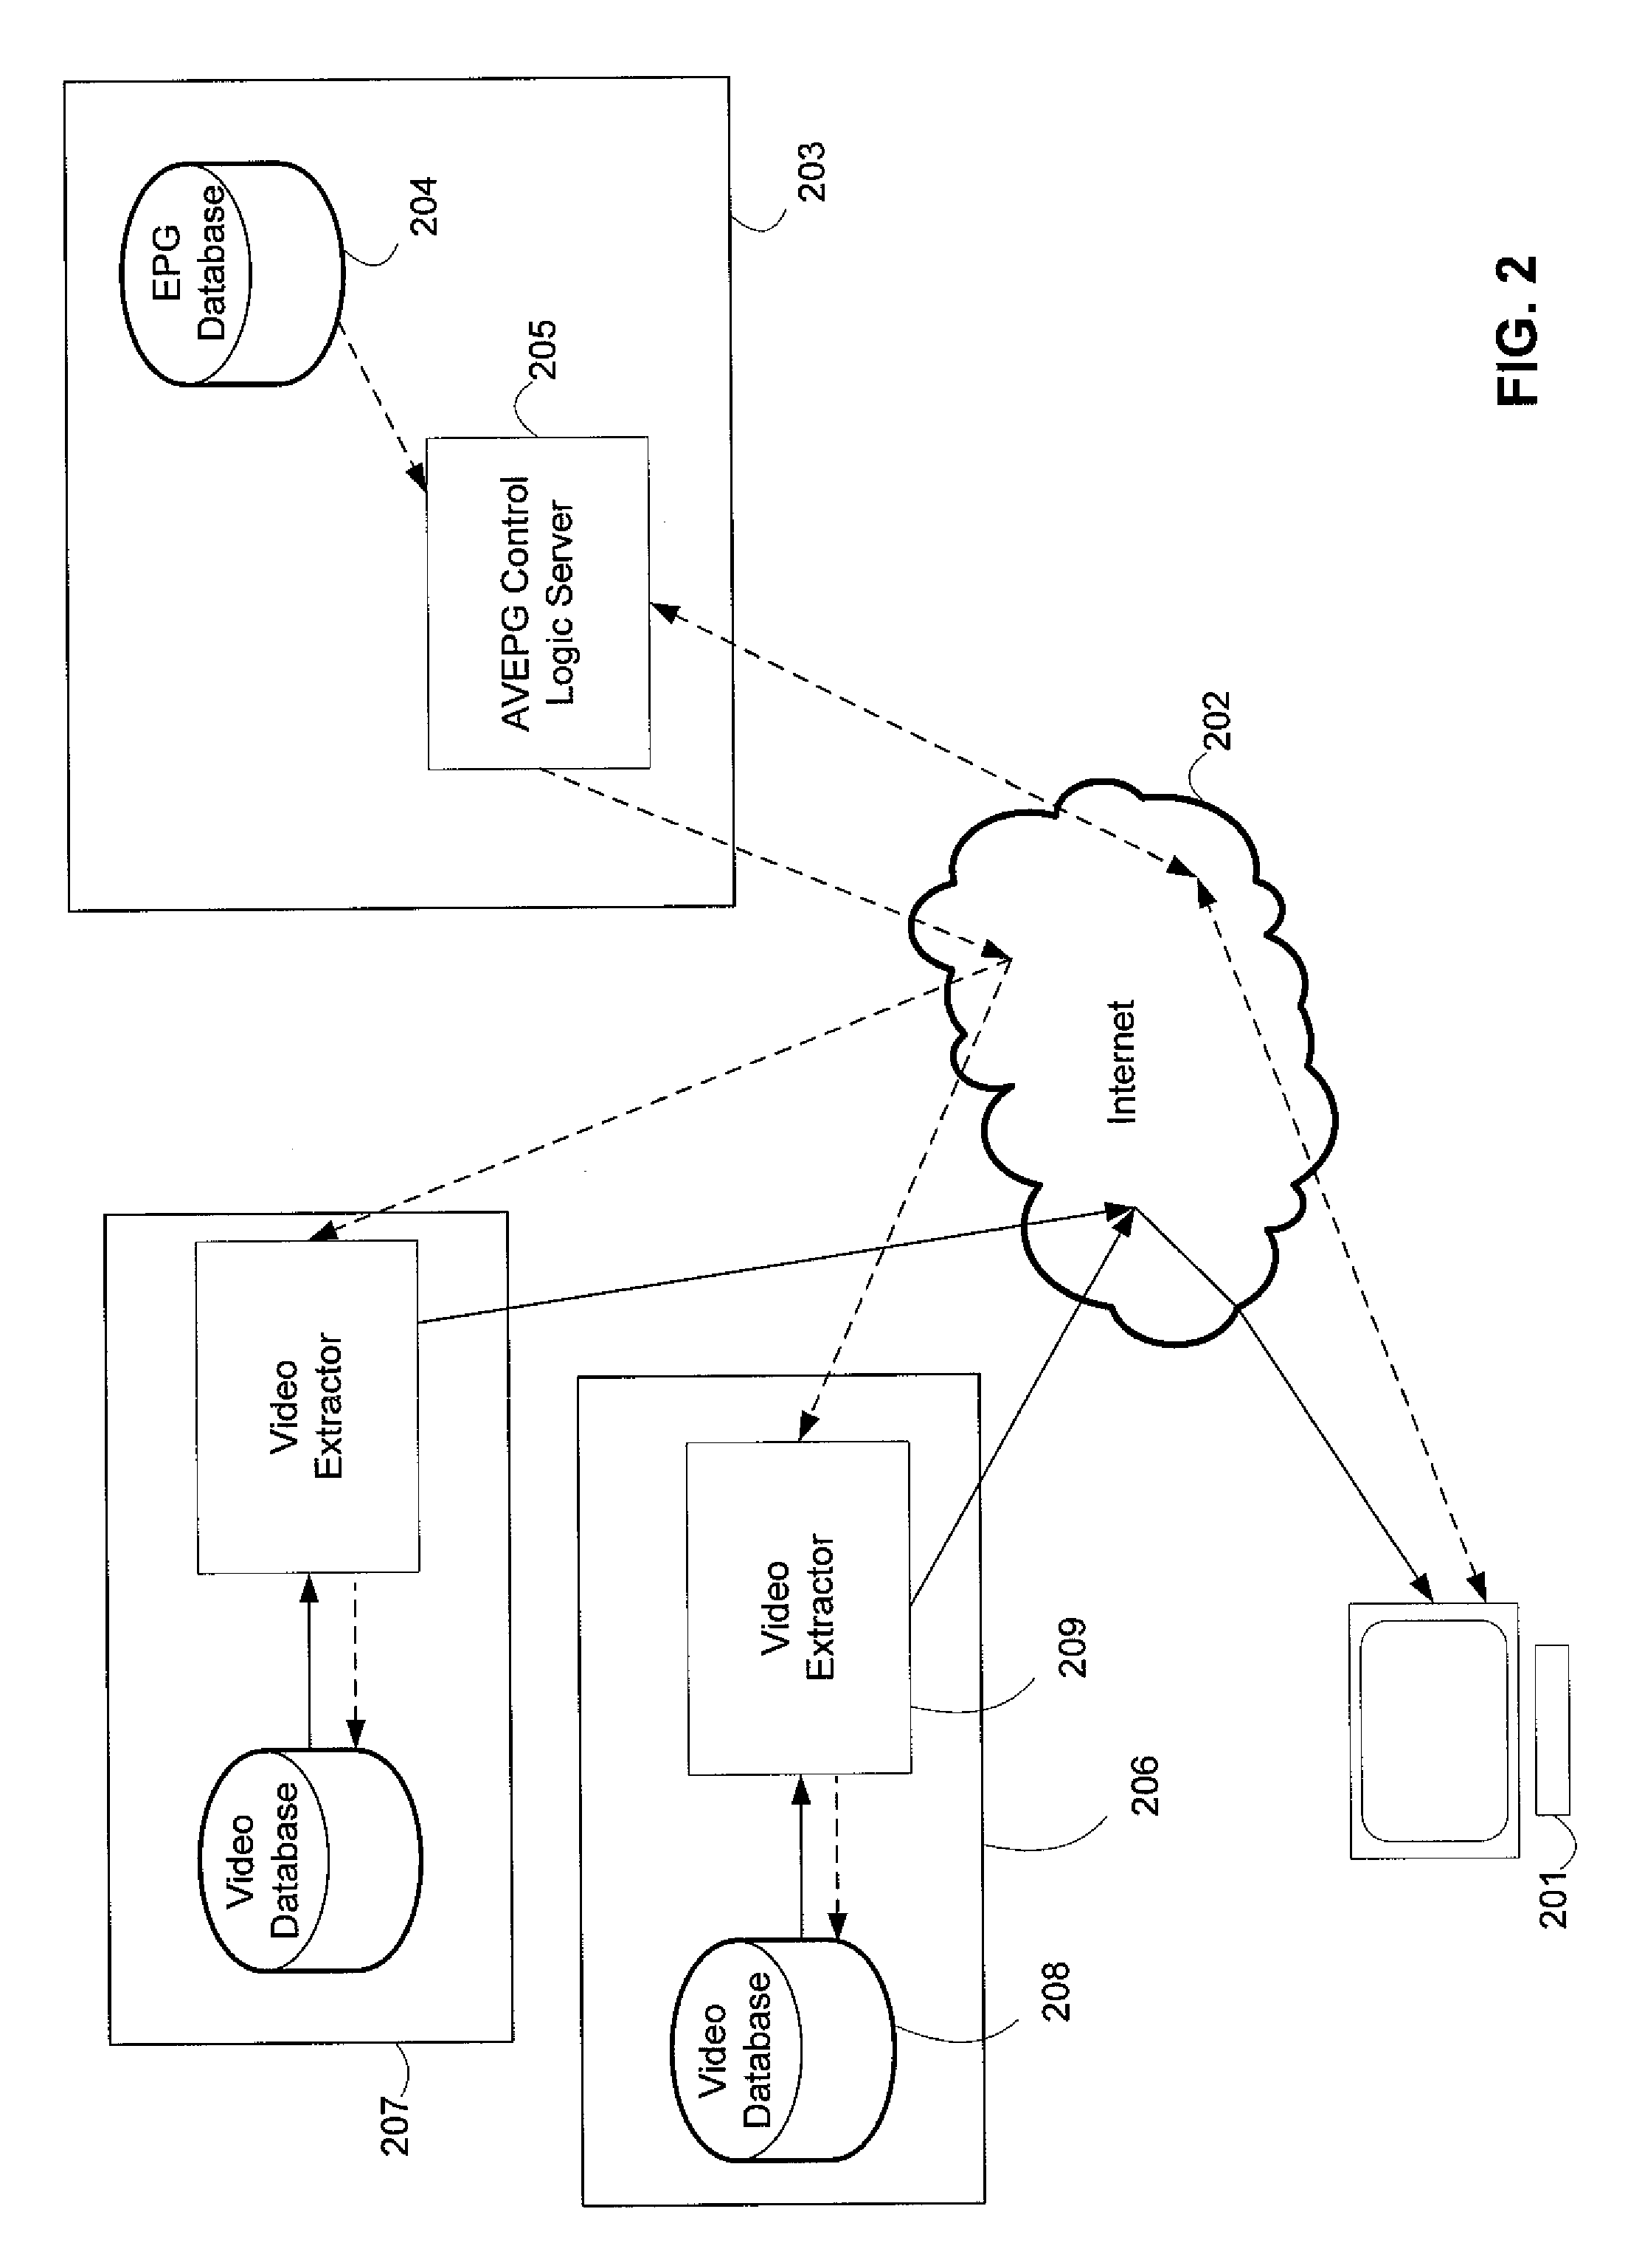 System and method for an active video electronic programming guide